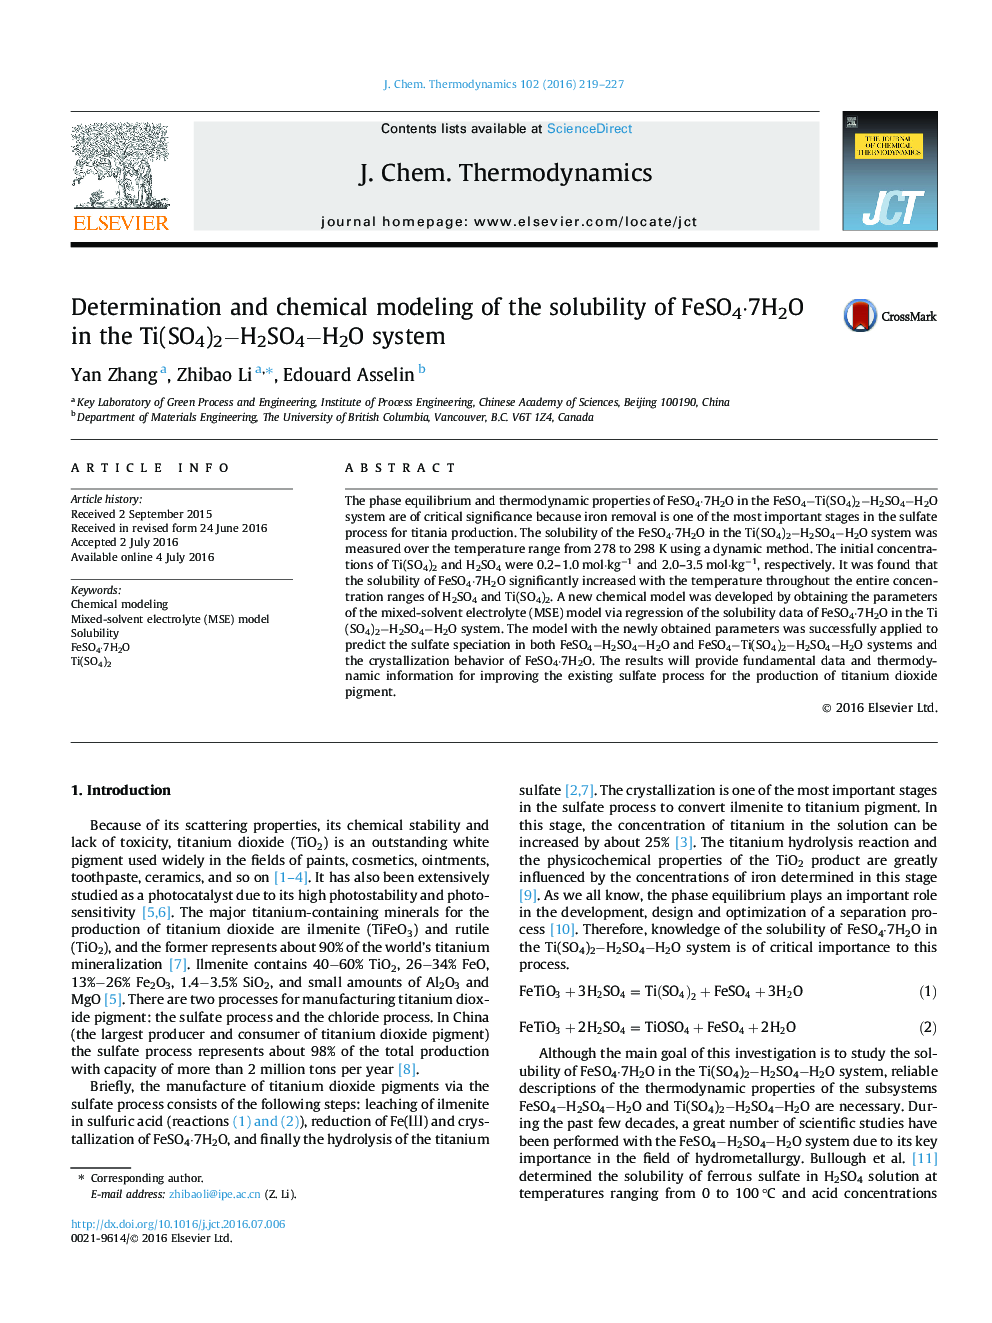 Determination and chemical modeling of the solubility of FeSO4·7H2O in the Ti(SO4)2−H2SO4−H2O system